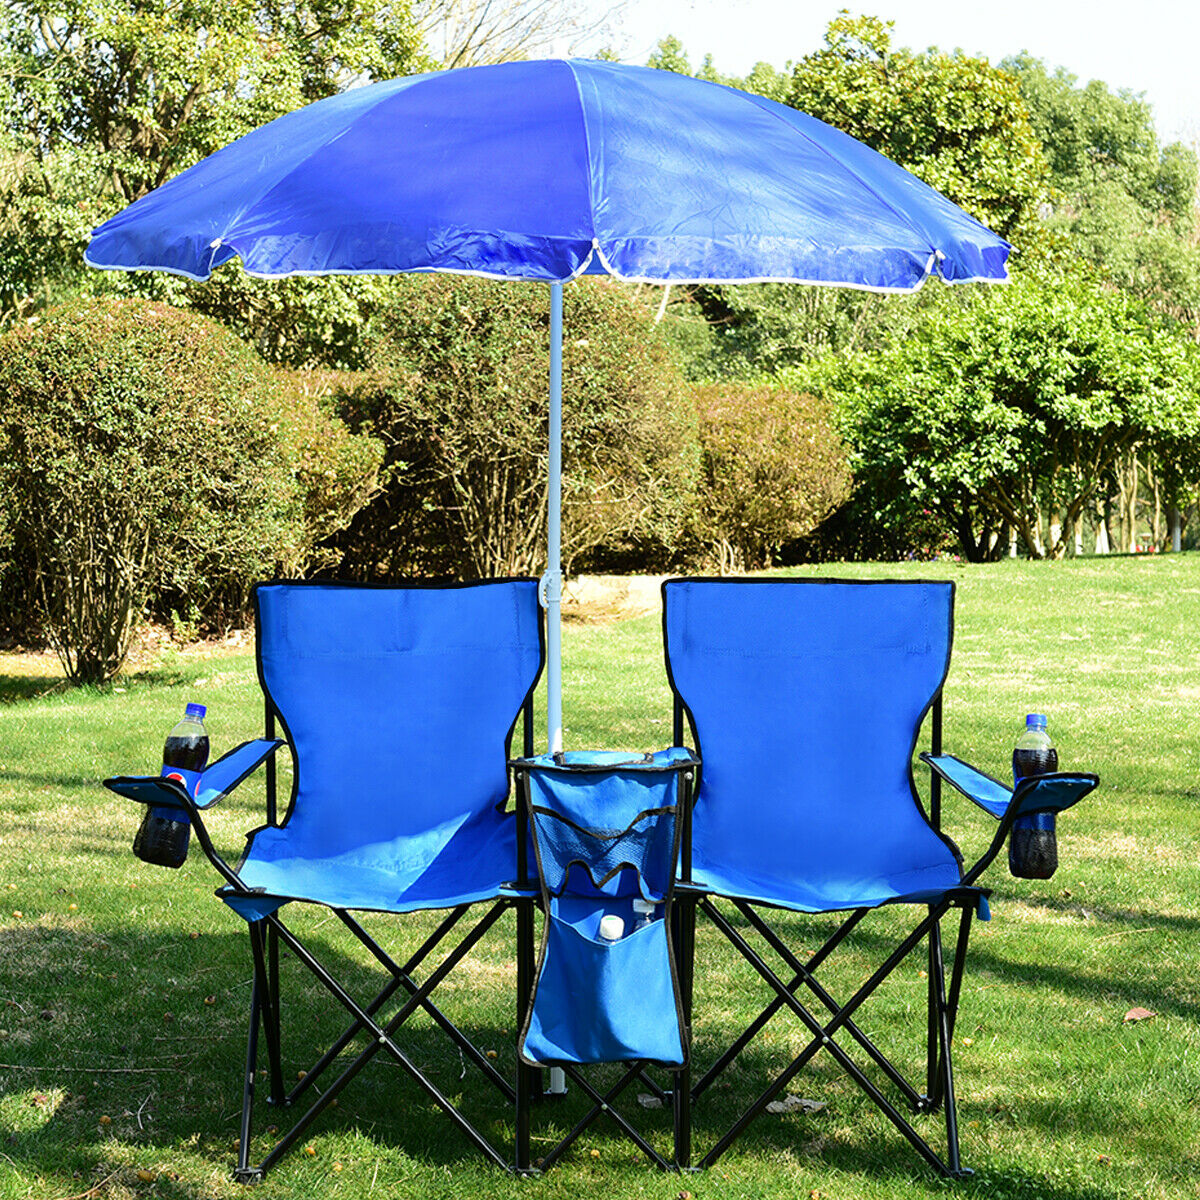 Costway Portable Folding Picnic Double Chair W/Umbrella Table Cooler, $65.27 + Free Shipping